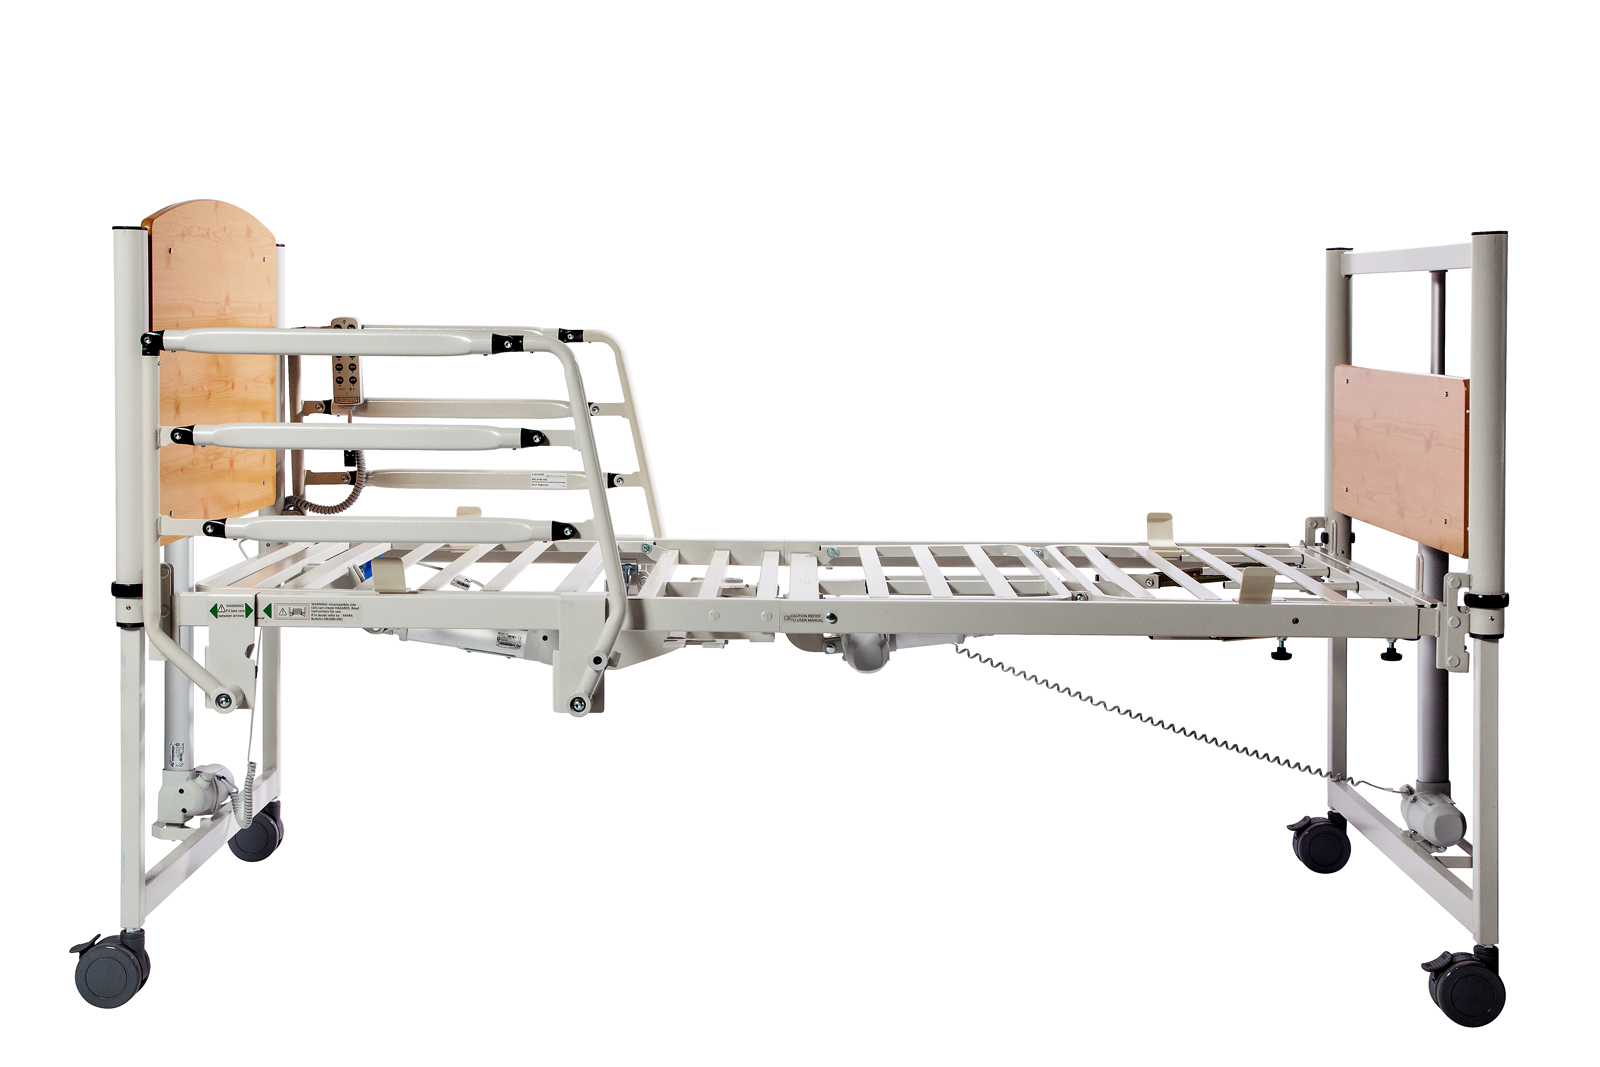 The 8199 Home Care Bed frame is shown from the side with half rails and without a mattress